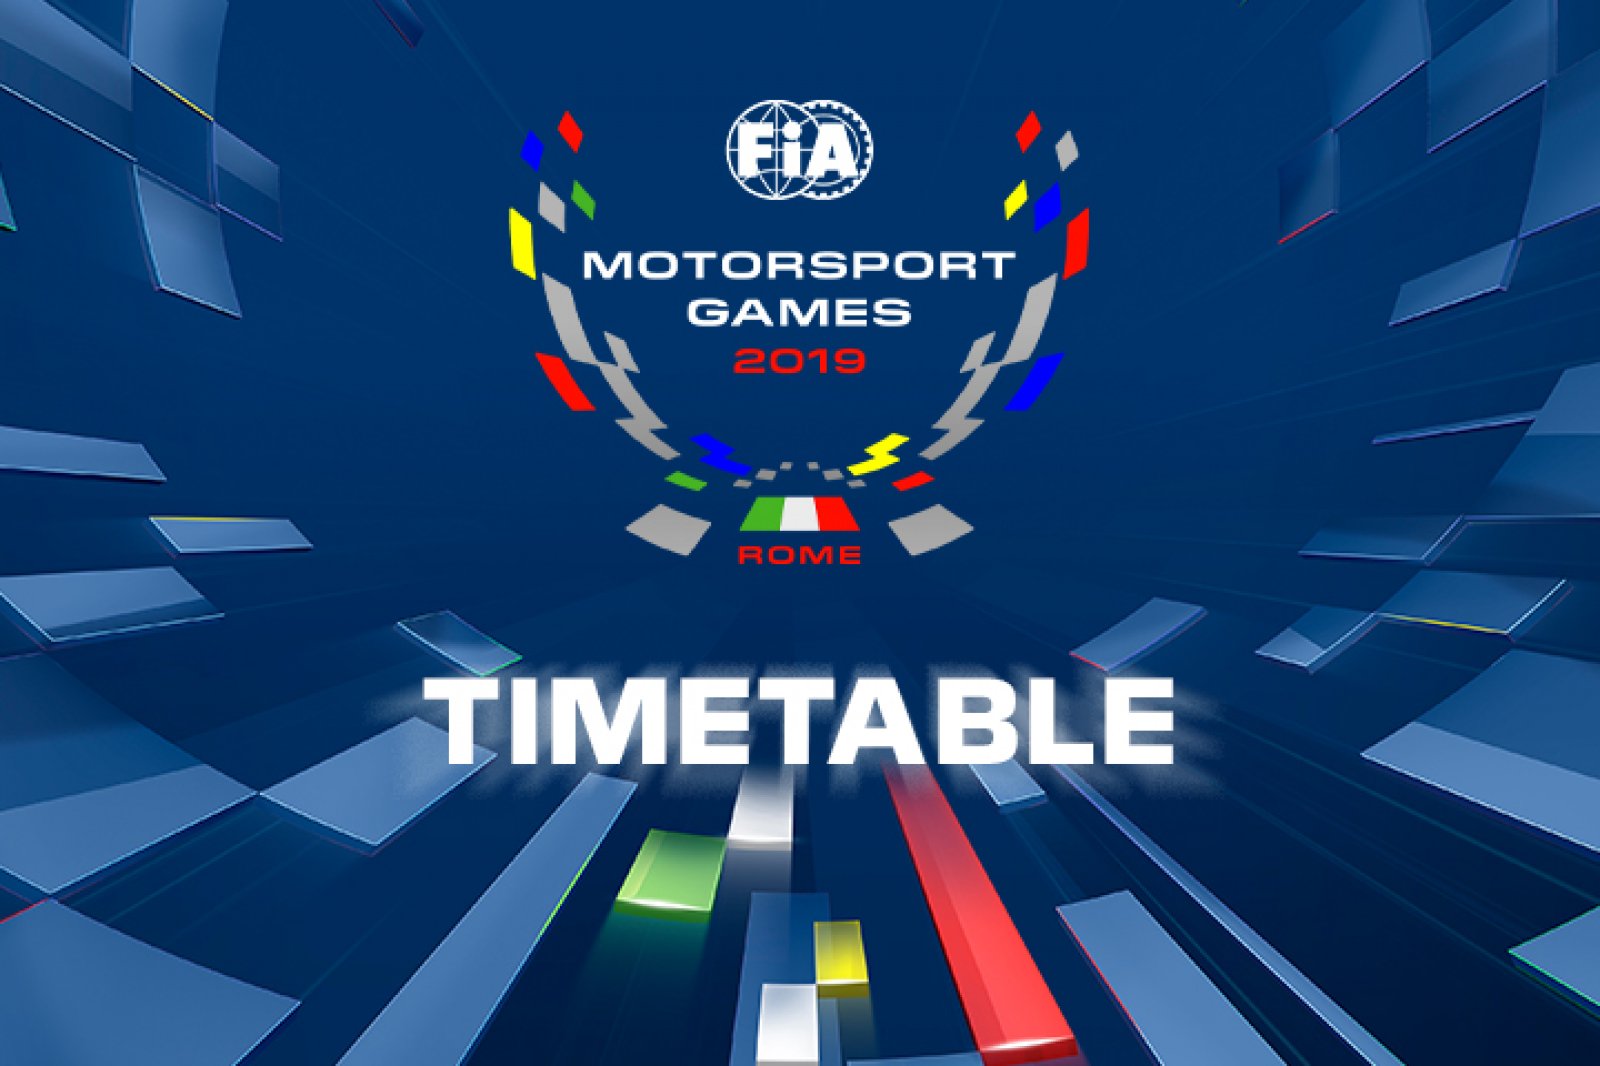 FIA Motorsport Games expands to 15 disciplines for second edition